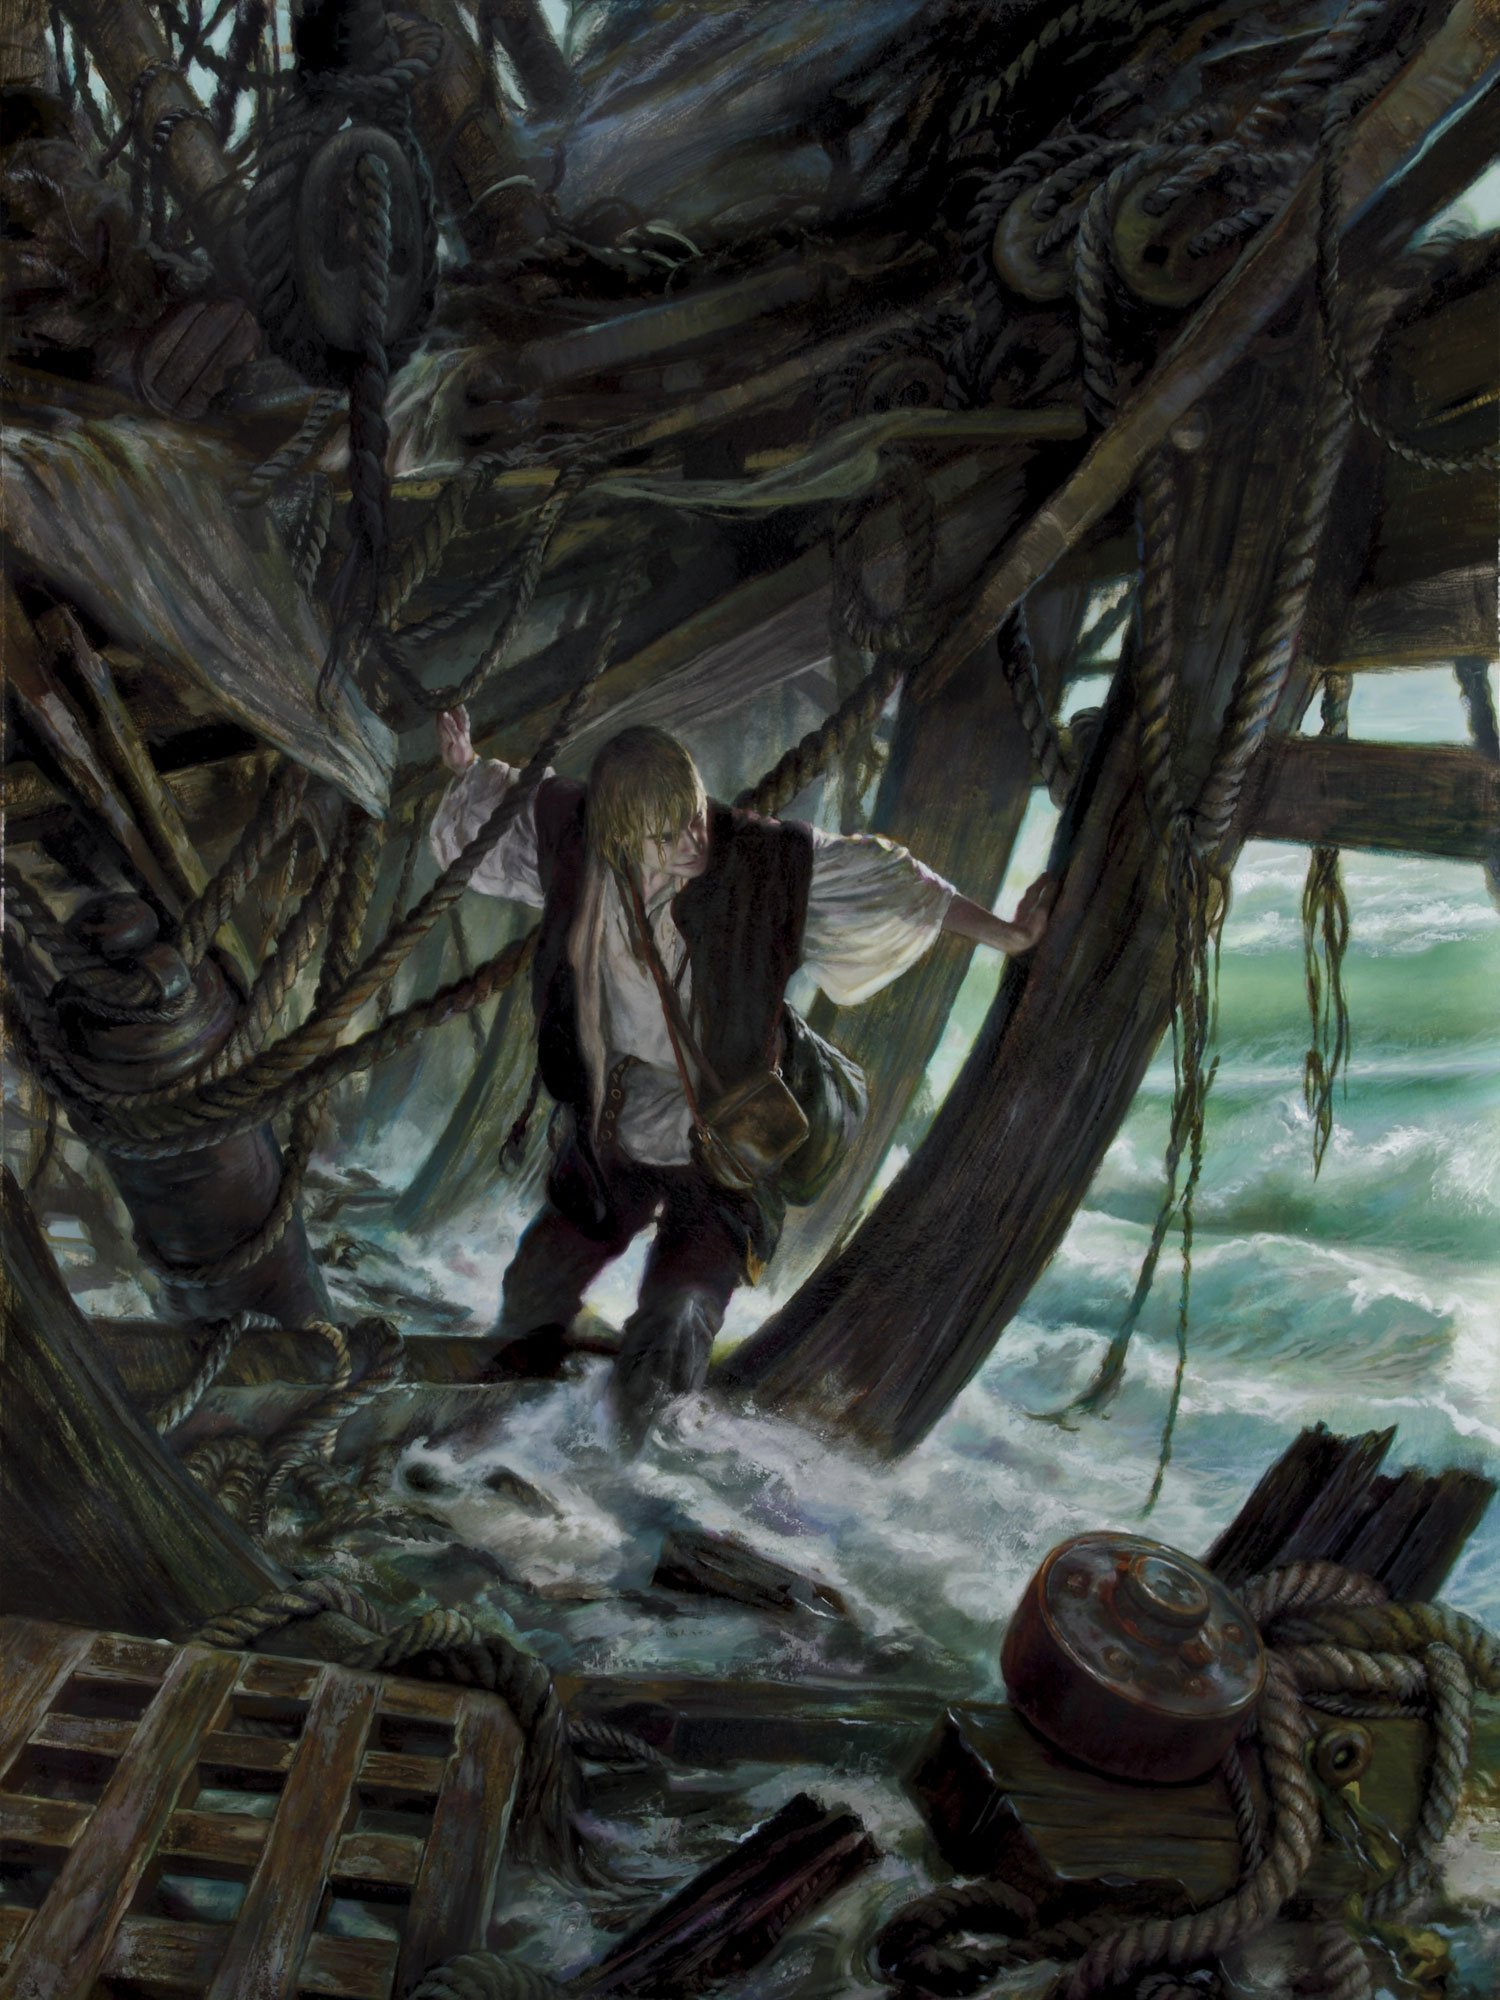 Scholar- Robinson Crusoe
36"x48" oil on panel 2011 
cover art for the Tor Books novel by L.E. Modessit, Jr
original art available for purchase 